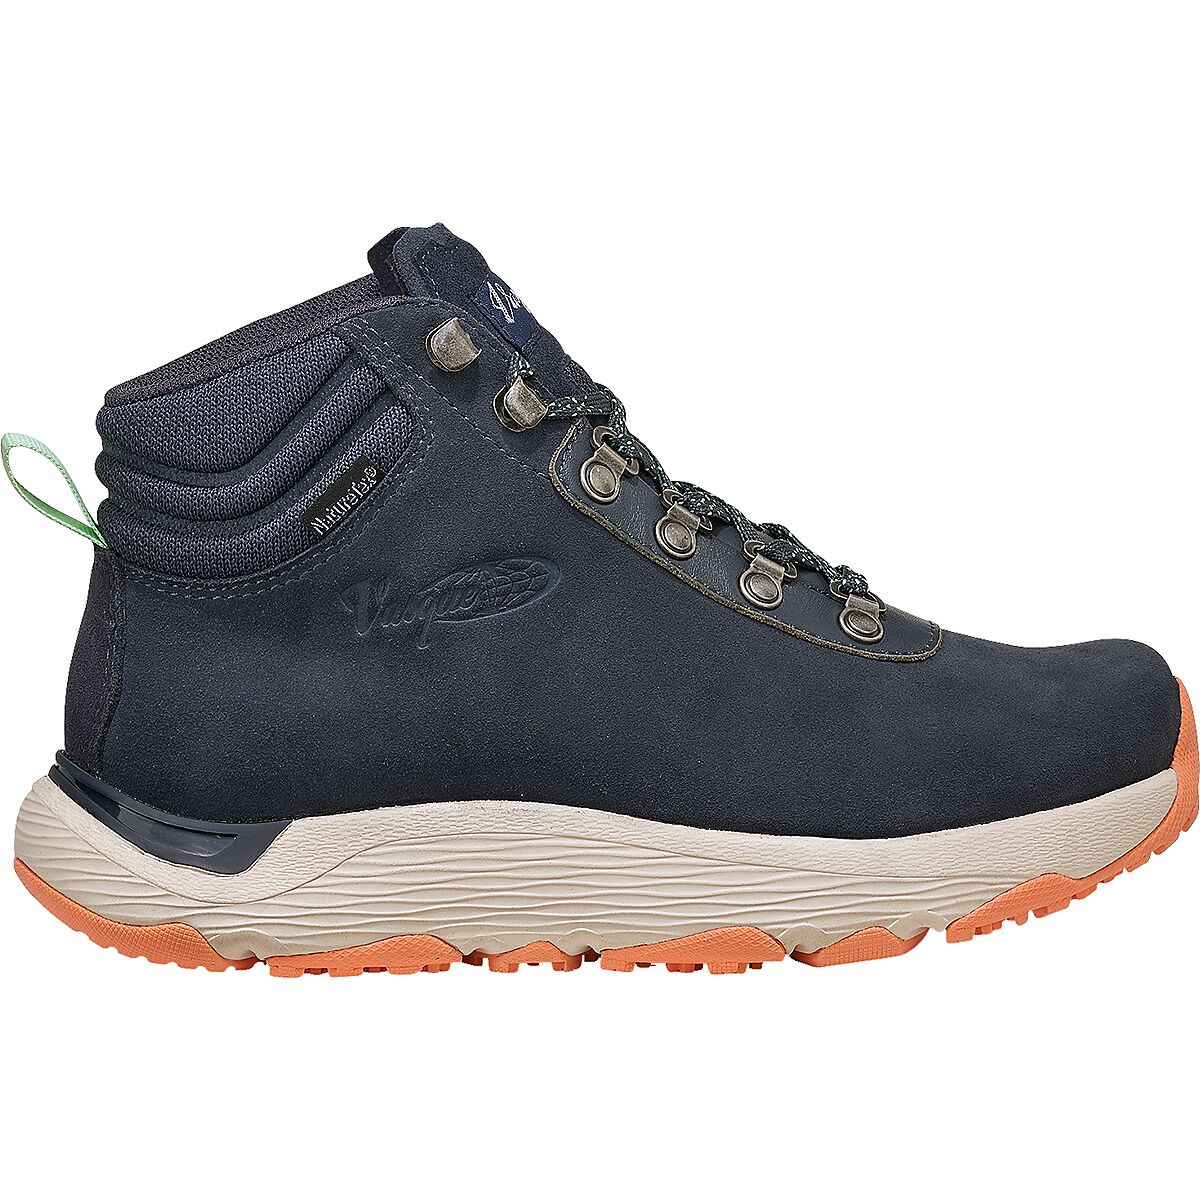 Vasque Sunsetter NTX Hiking Boot - Women's product image